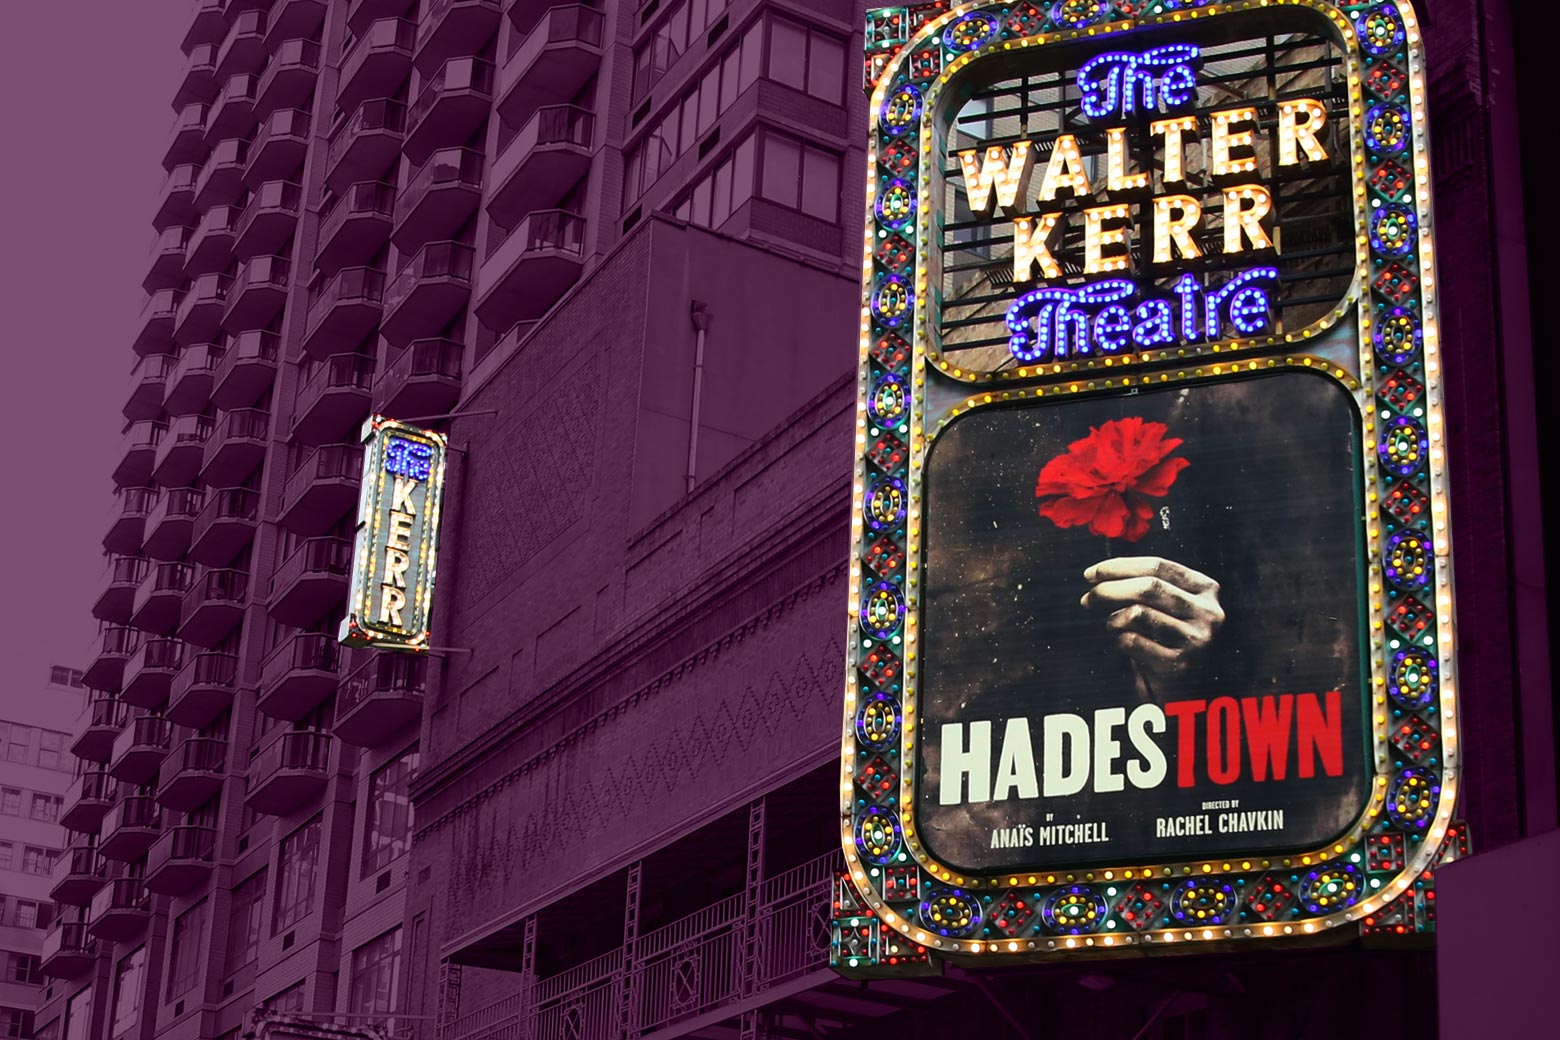 Hadestown on the marquee outside the theater, with a high-rise in the background